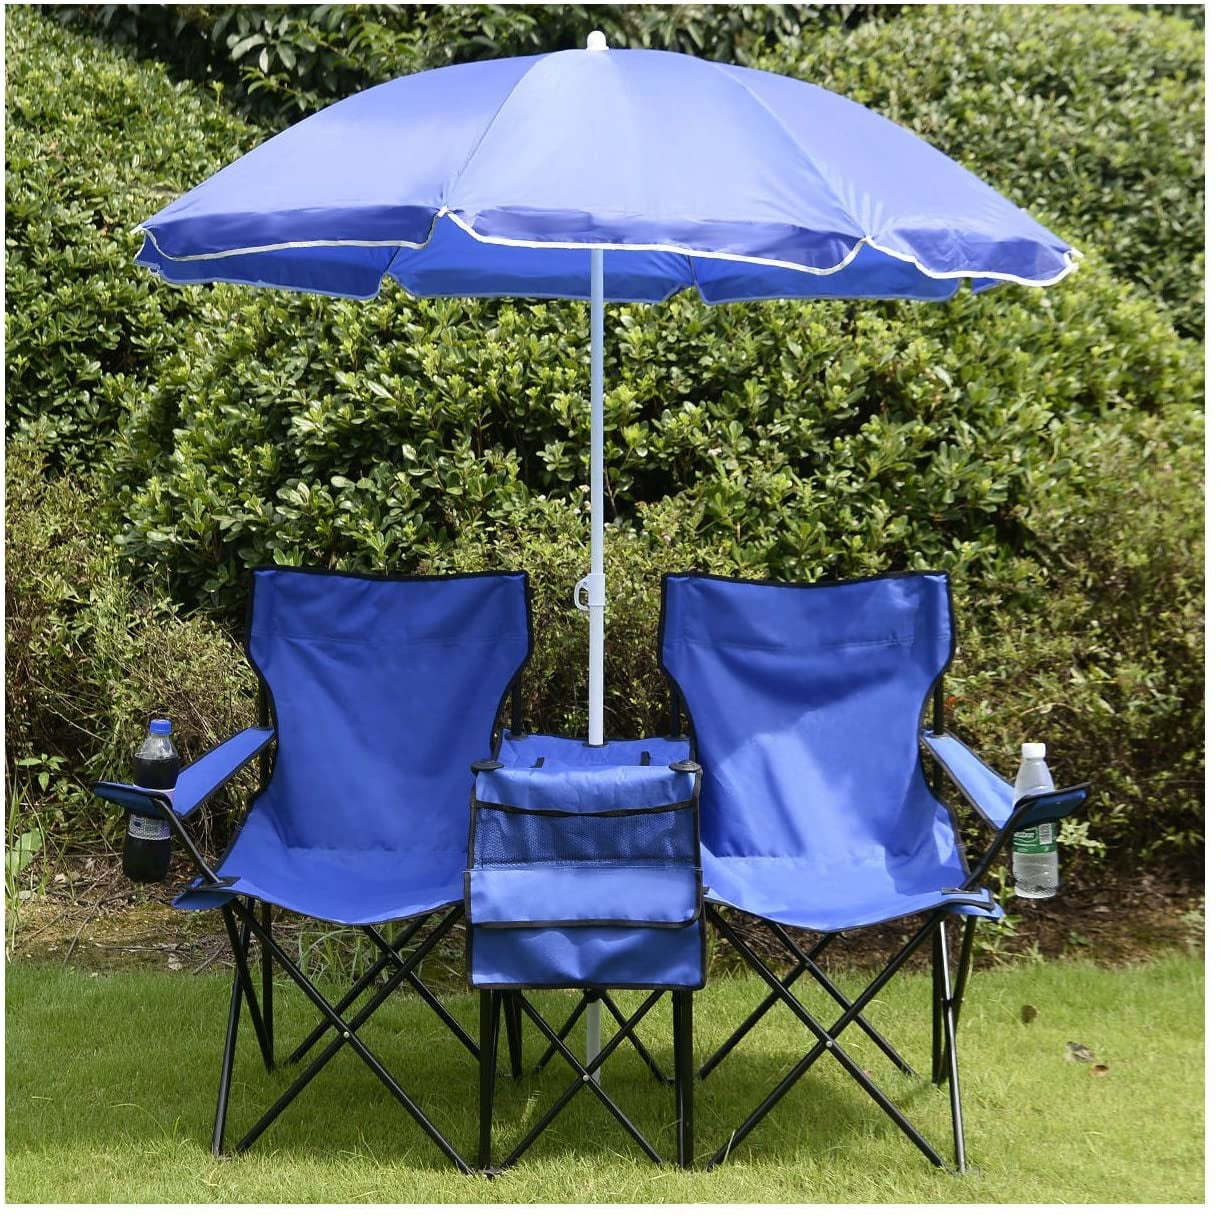 Modern Beach Chair With Umbrella Holder for Simple Design